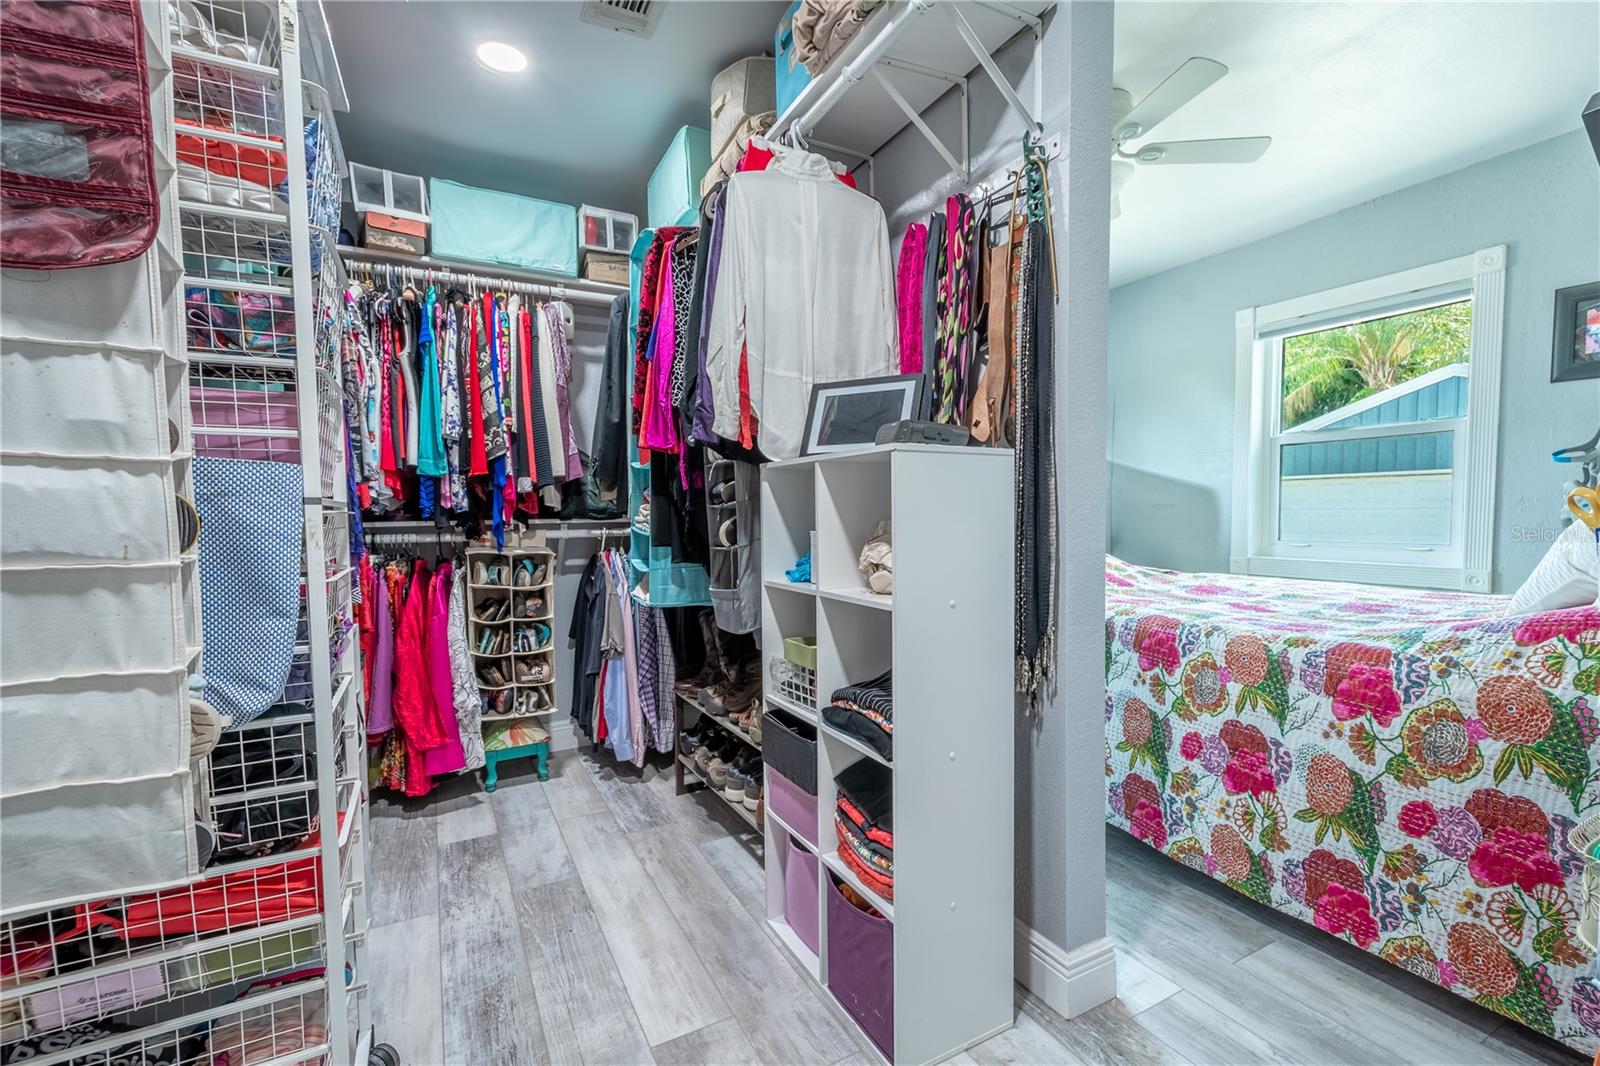 The primary bedroom features a large walk-in closet that can easily be reconfigured to add space to the bedroom.